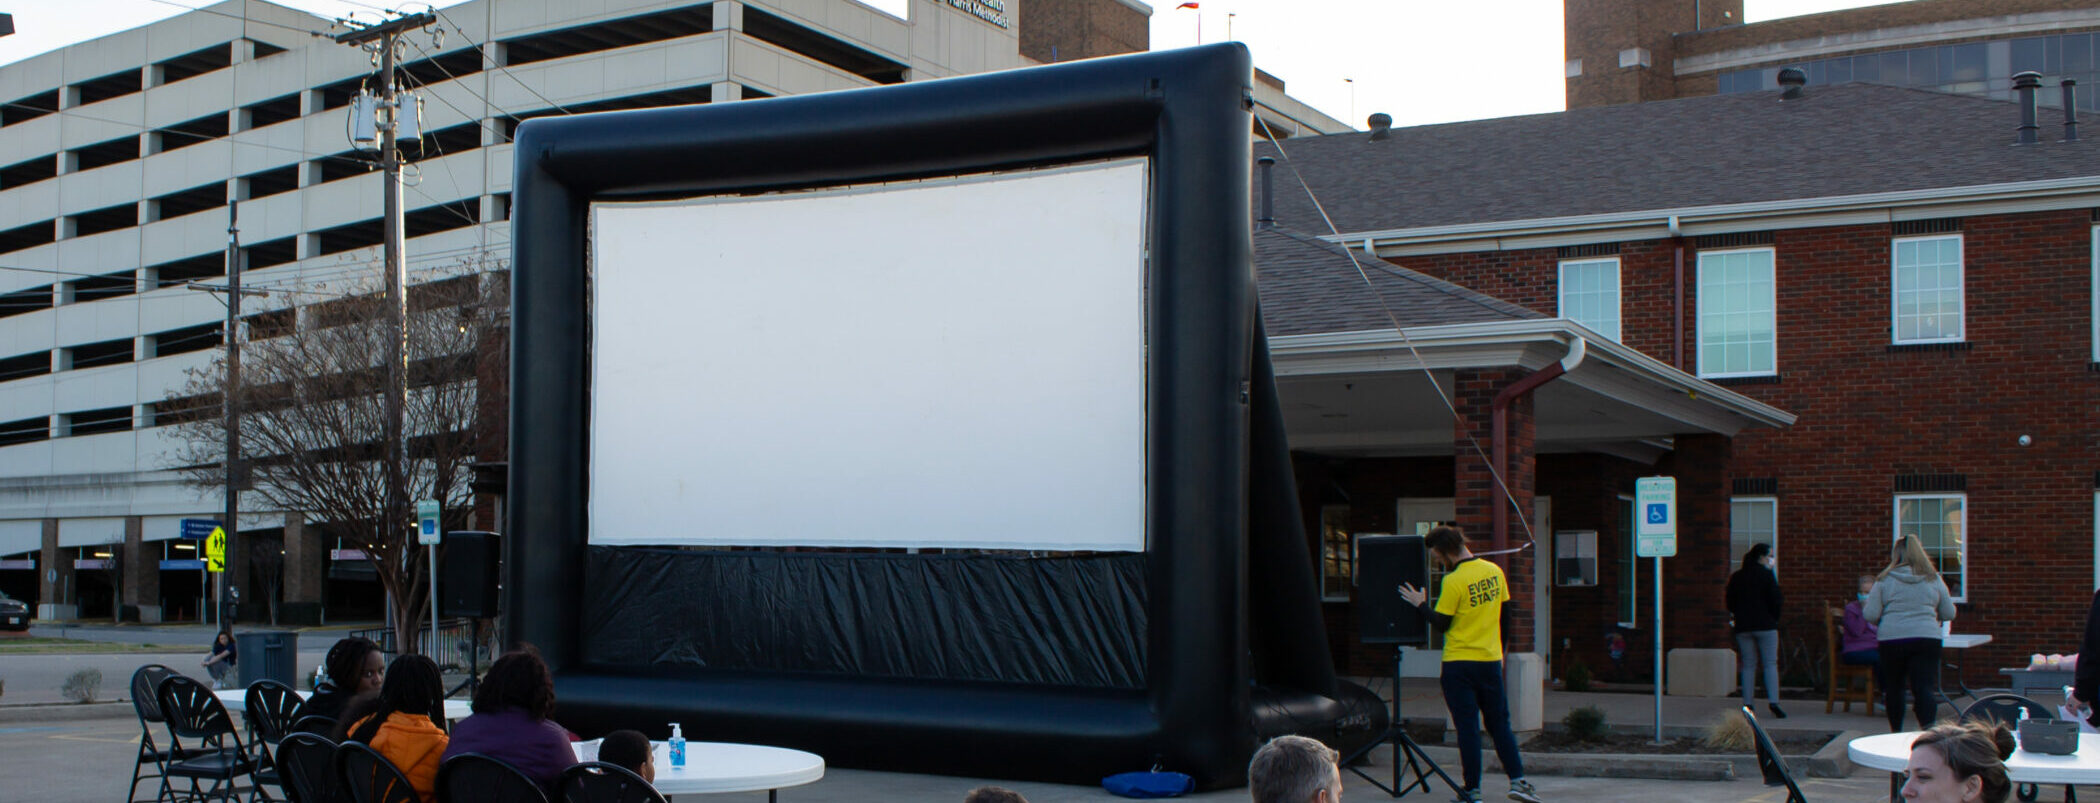 Clients attend an outdoor movie screening for the March Connect Night at Cancer Care Services.